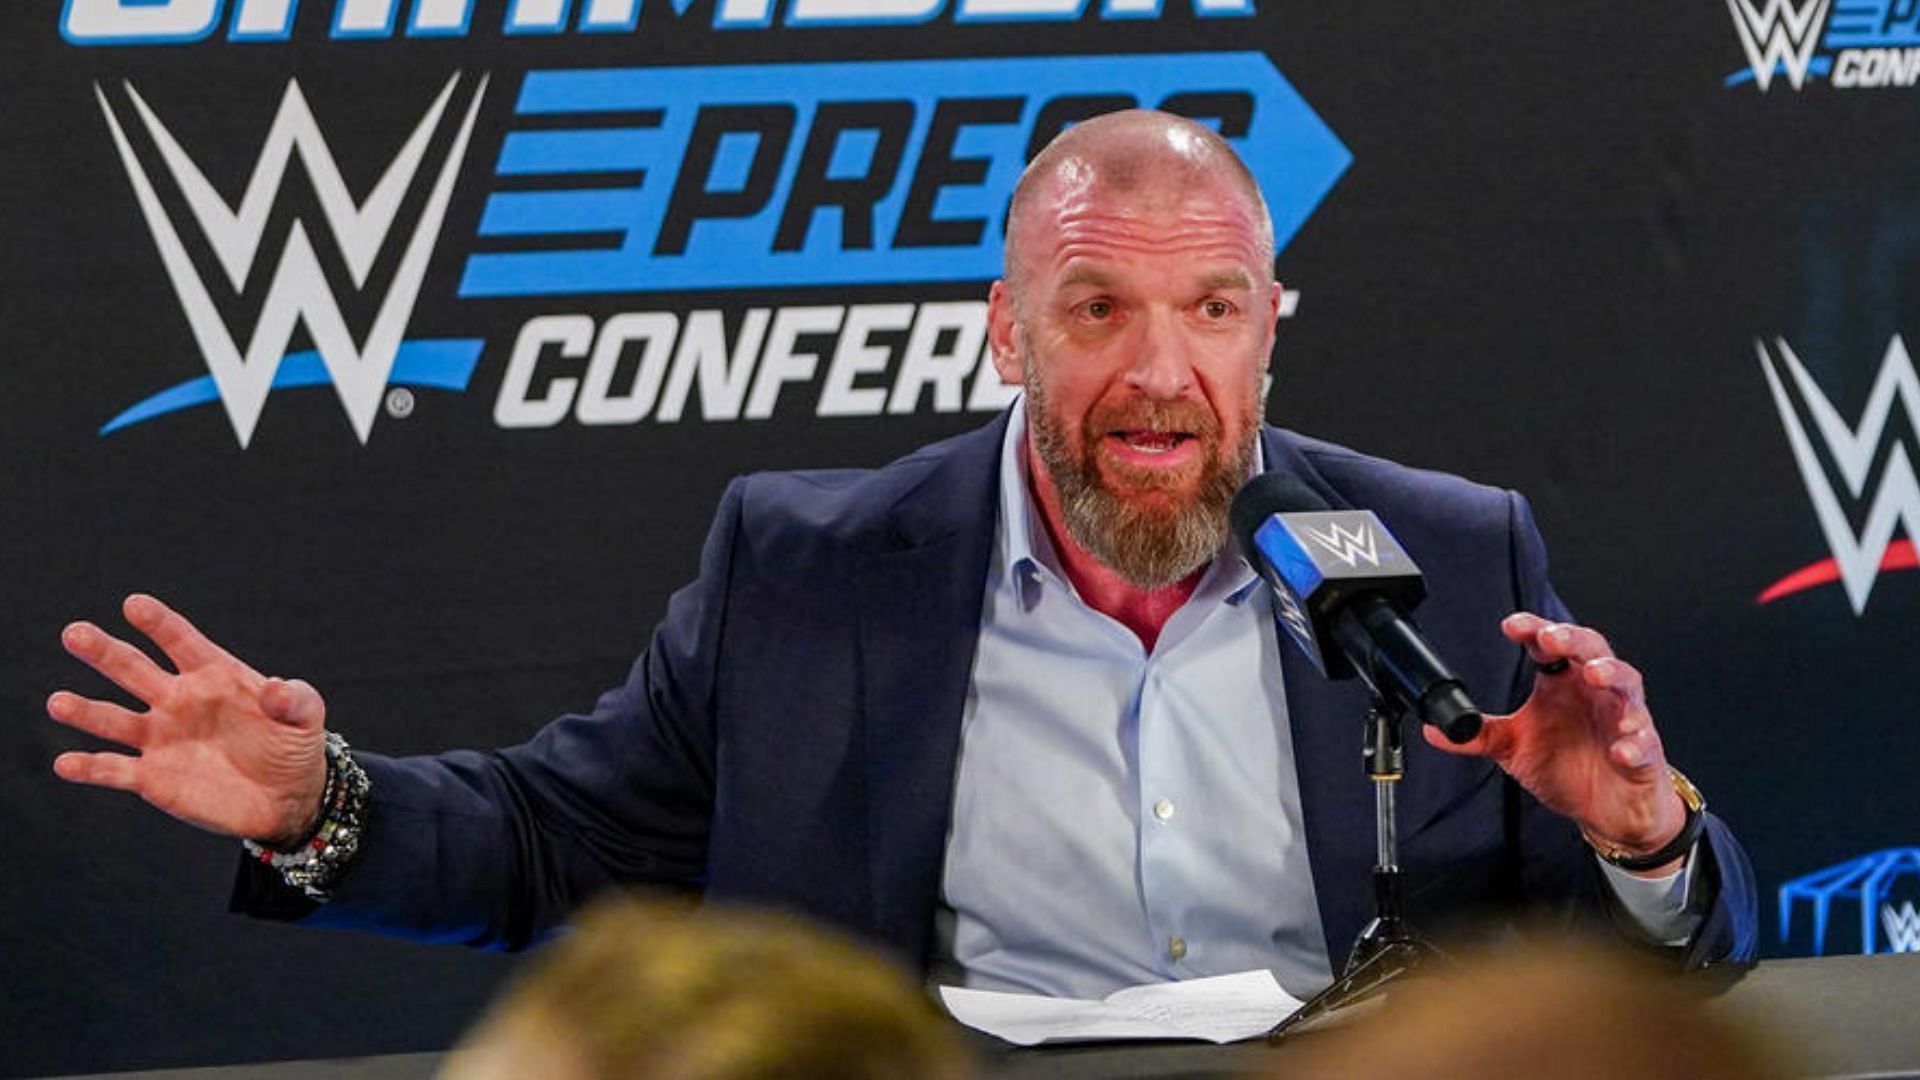 Triple H at WWE Elimination Chamber 2023!